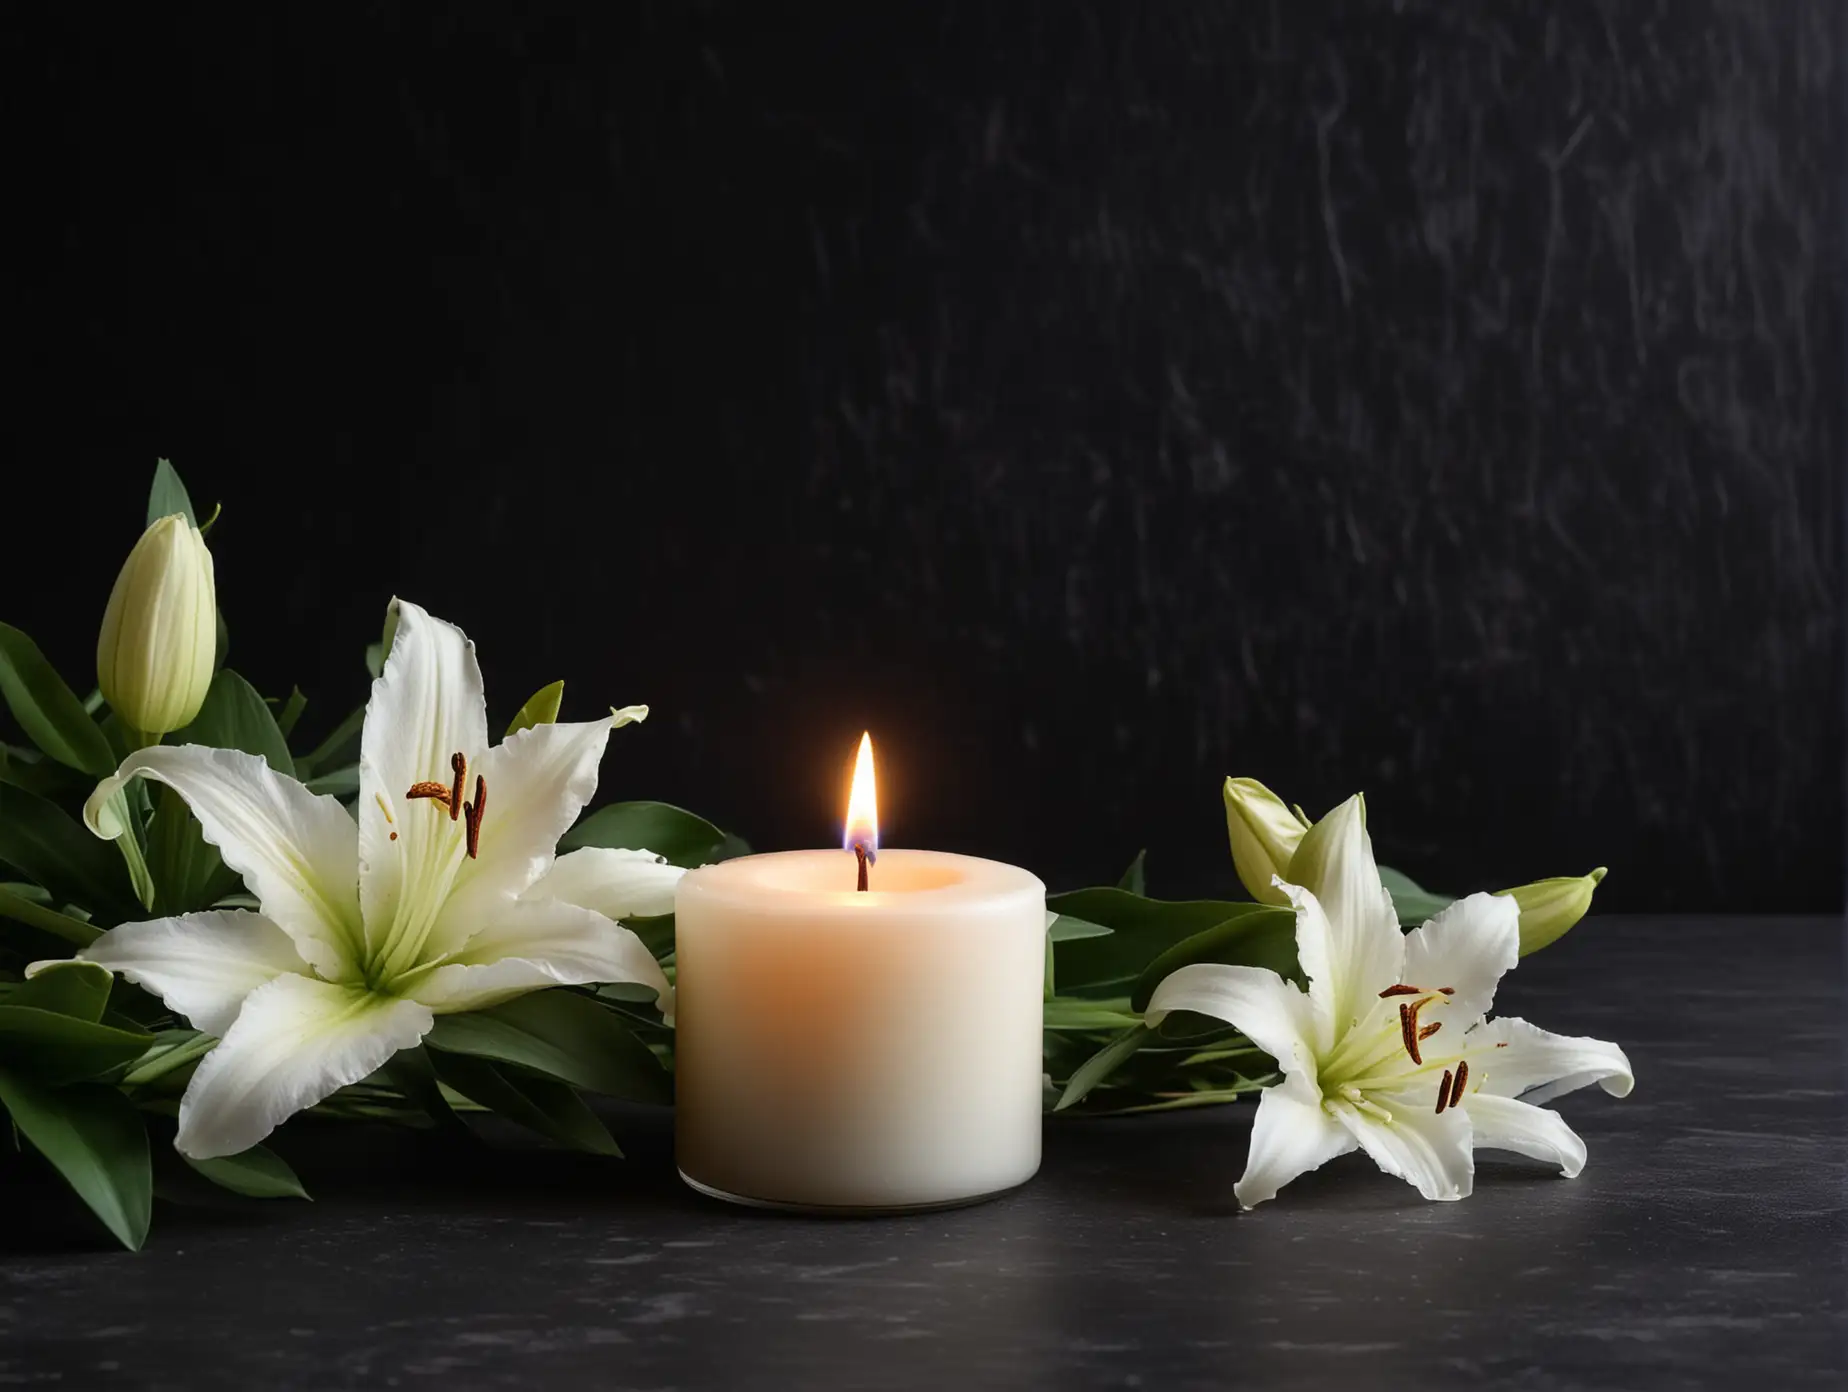 single white small burning candle surrounded by lily branches, dark background